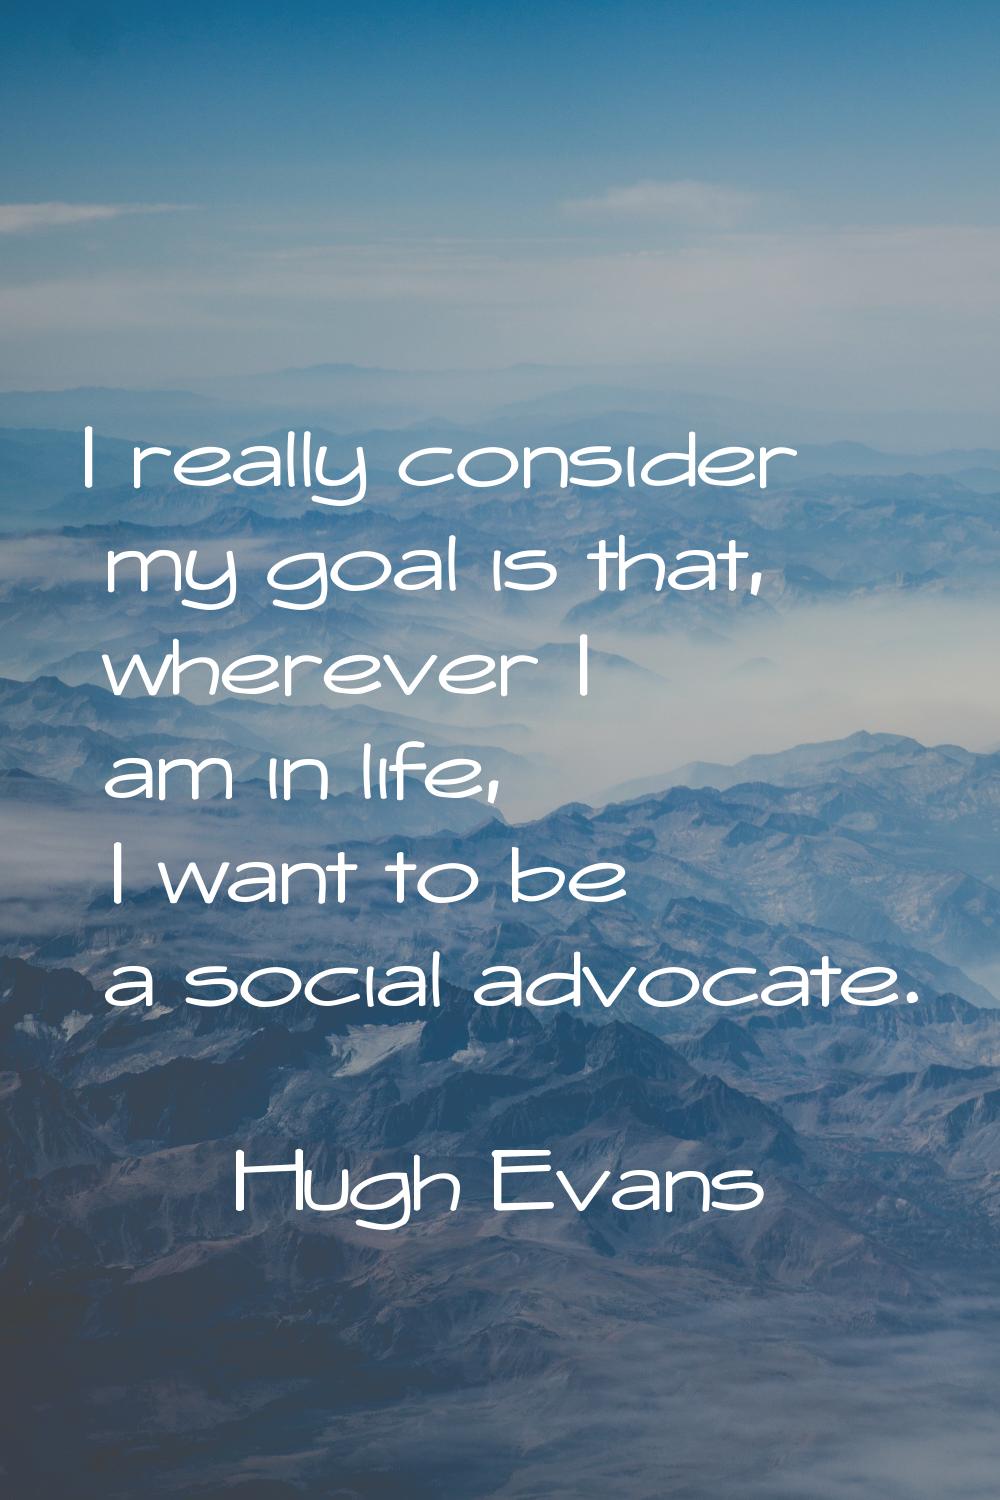 I really consider my goal is that, wherever I am in life, I want to be a social advocate.